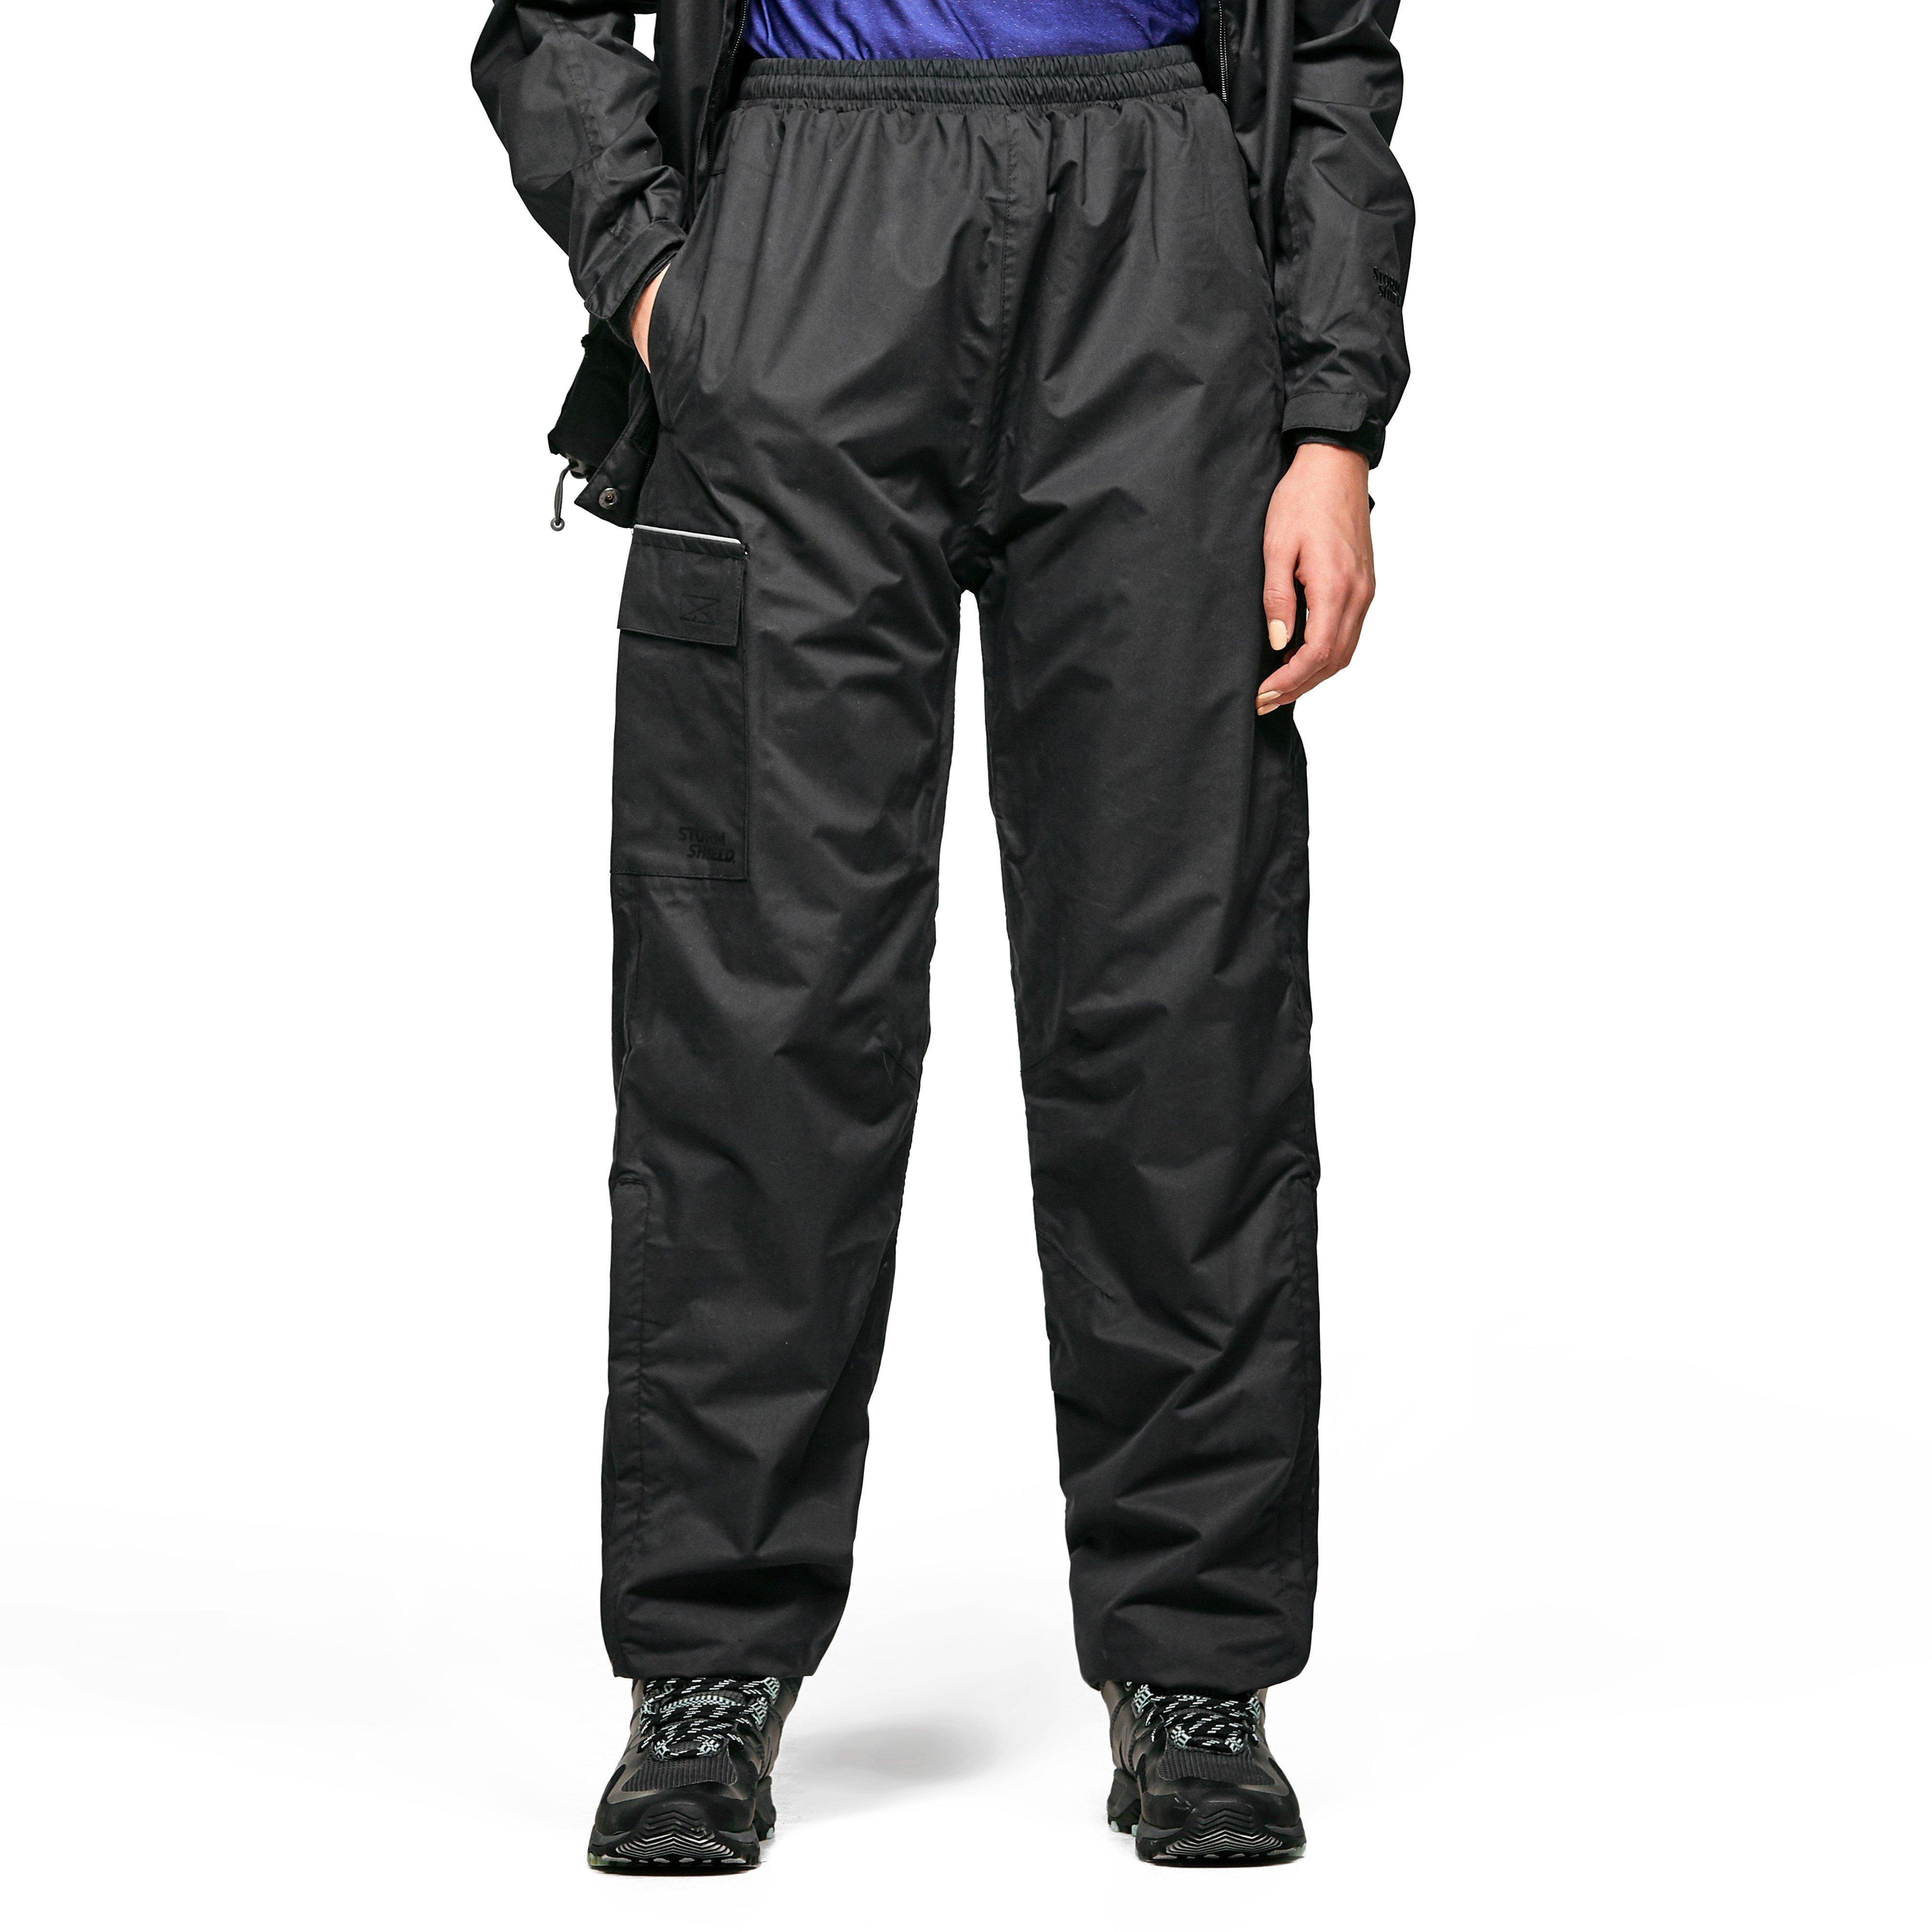 Womens Insulated Waterproof Trousers Black